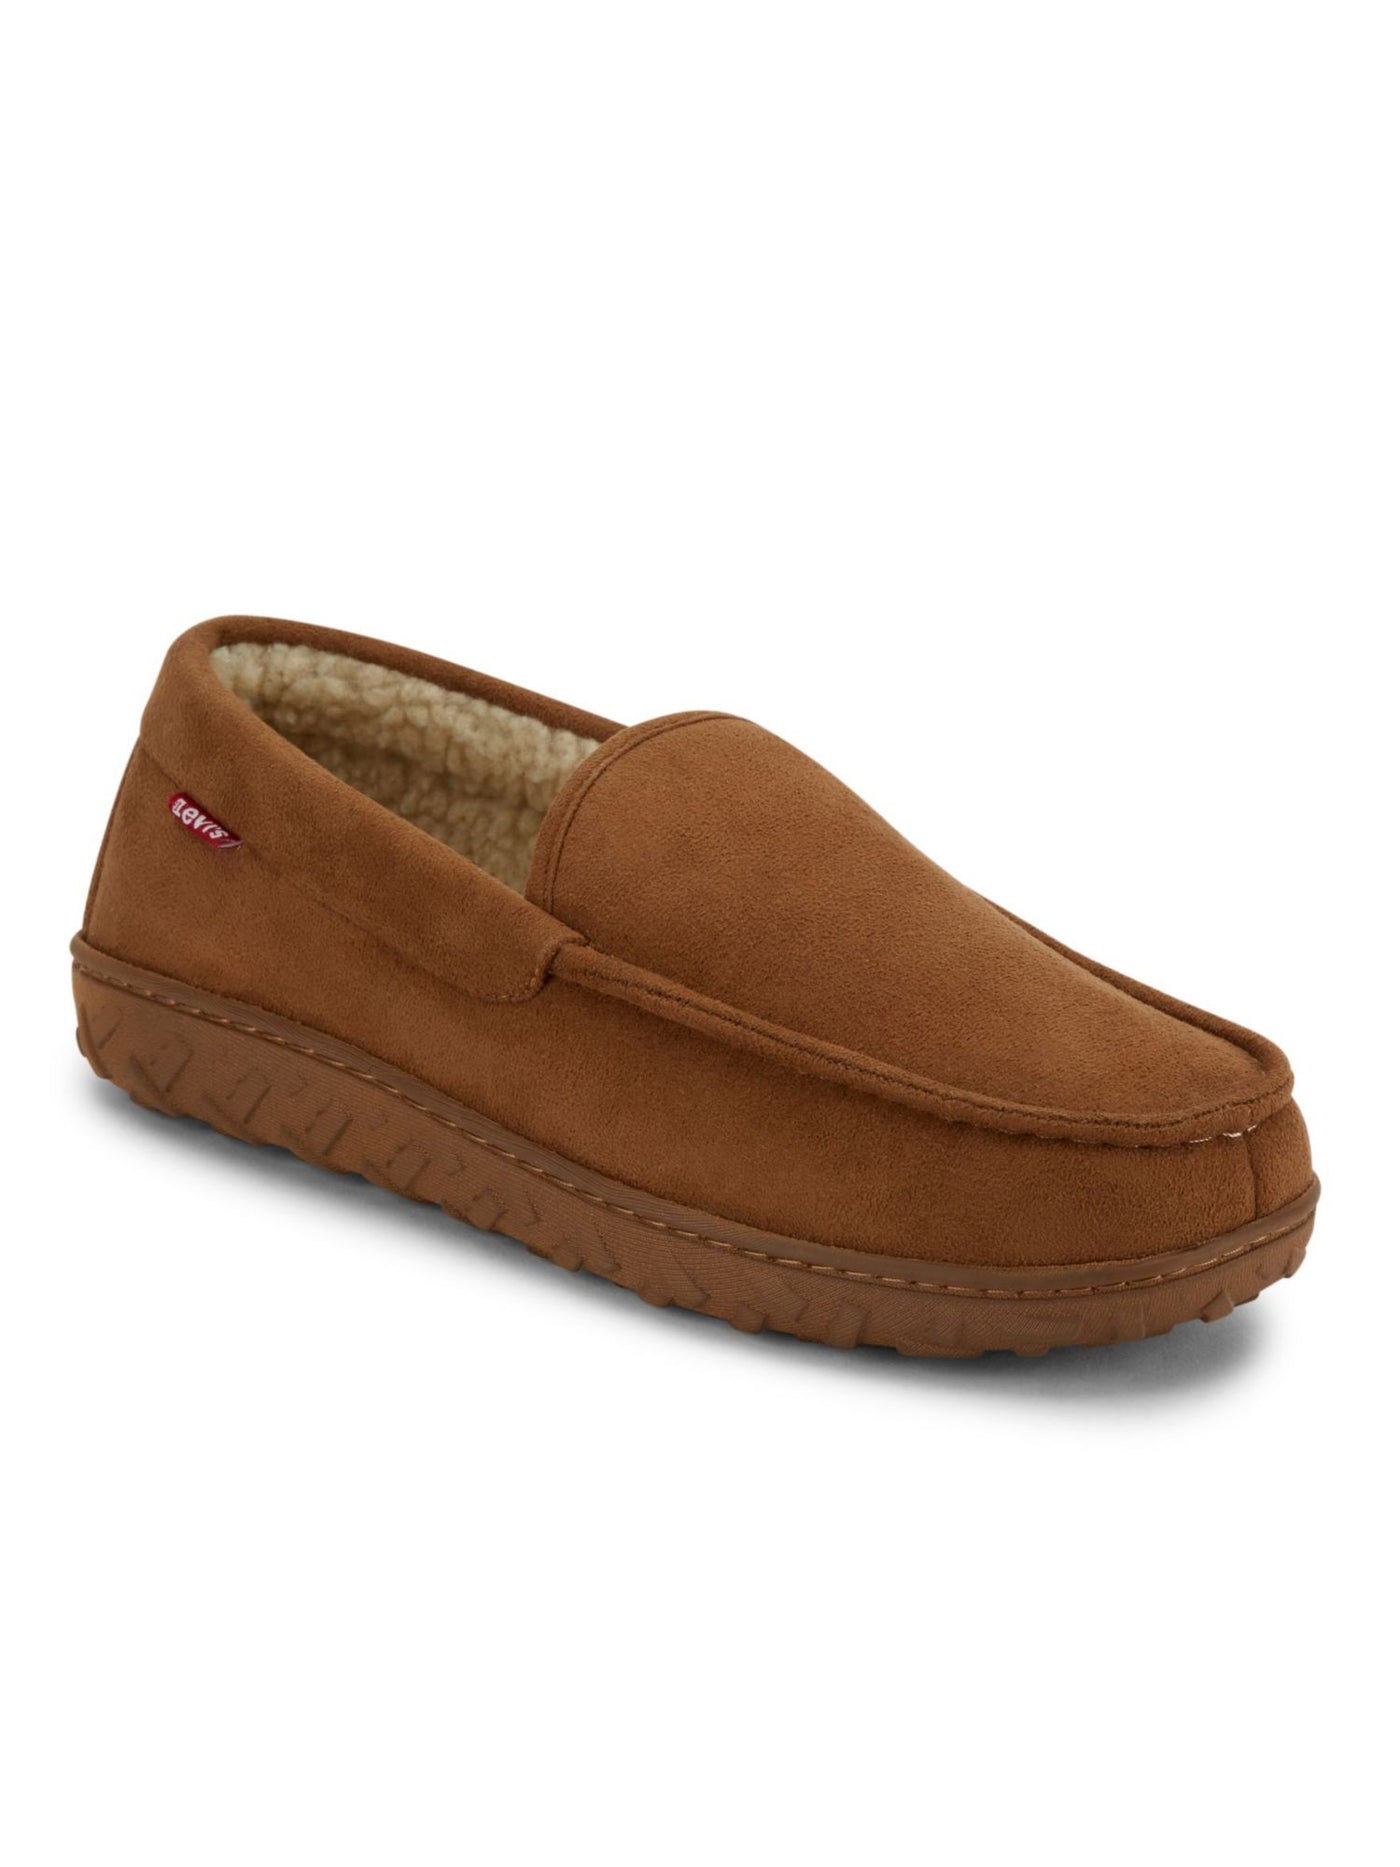 LEVI'S Womens Brown High Traction Cushioned Fields Round Toe Slip On Slippers Shoes 8-9